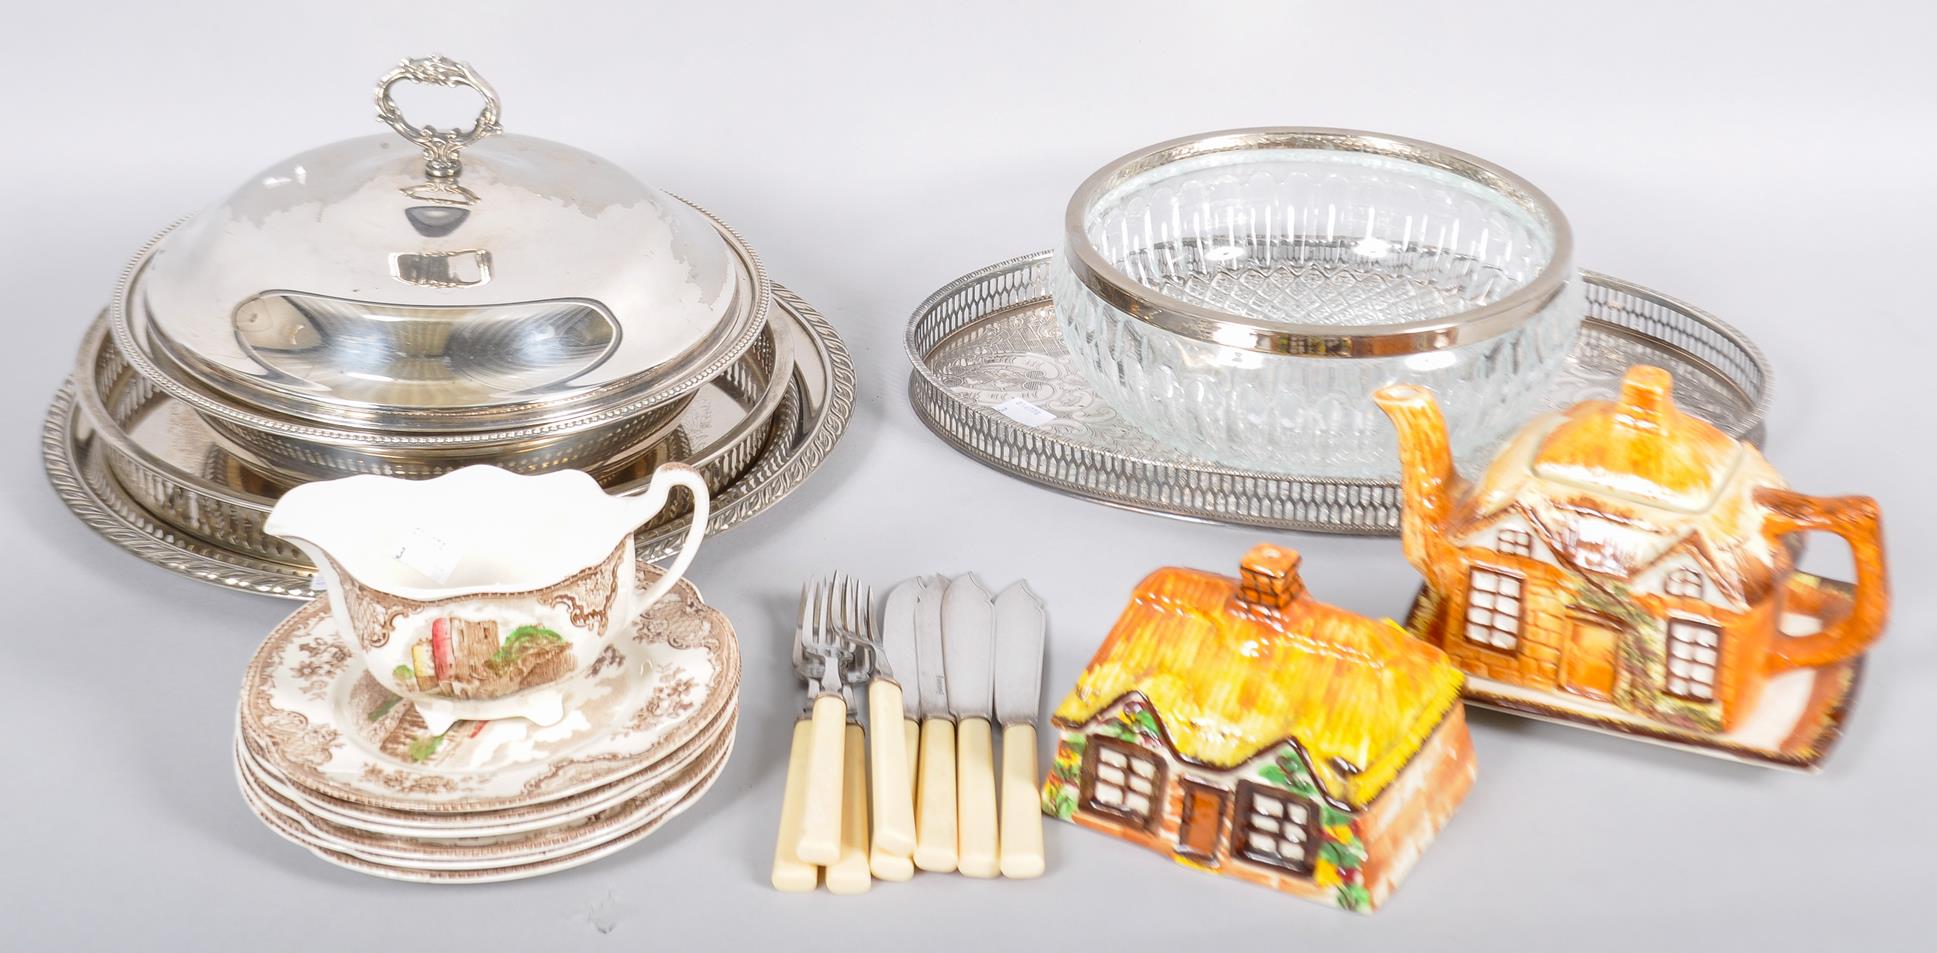 A collection of porcelain and silver plate